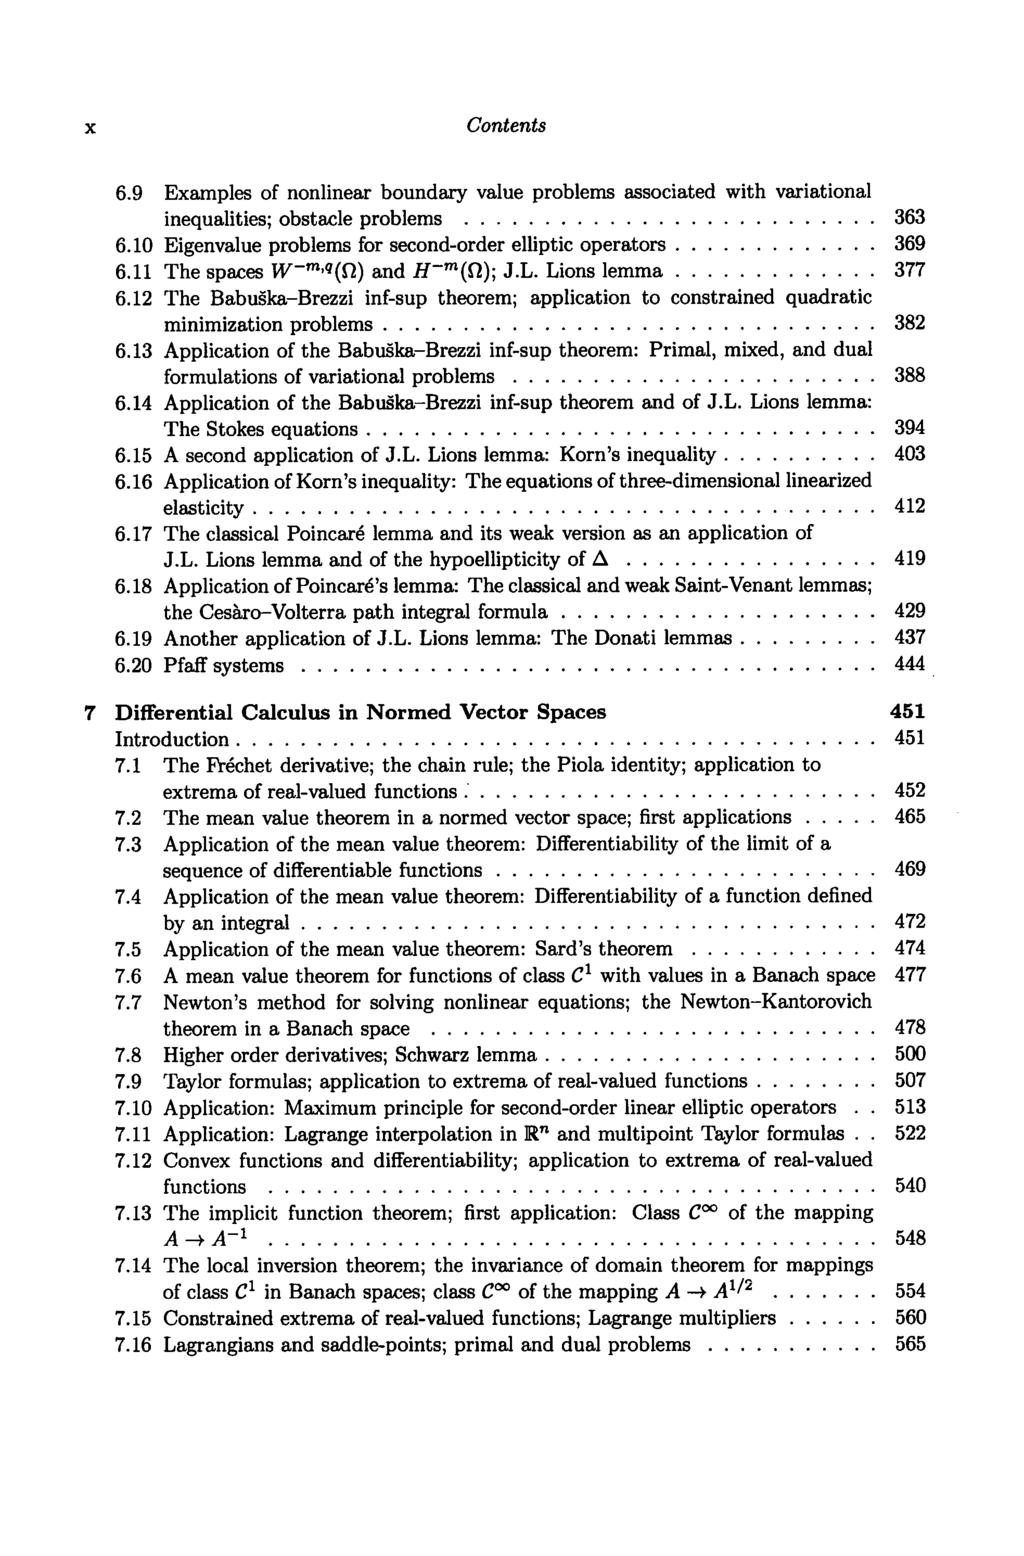 Contents 69 Examples of nonlinear boundary value problems associated with variational inequalities; obstacle problems 363 610 Eigenvalue problems for second-order elliptic operators 369 611 The